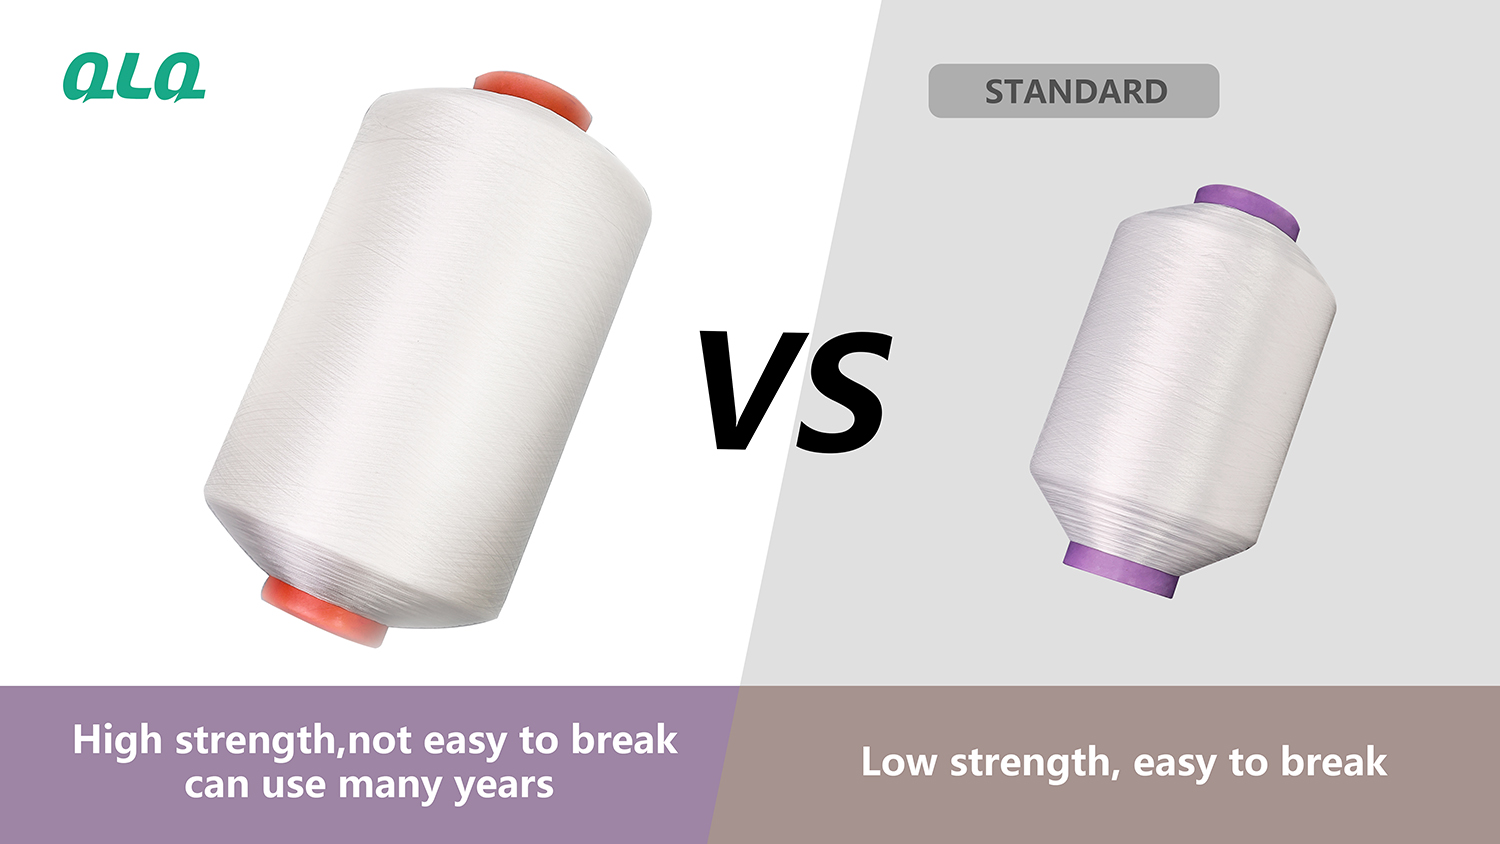 We use high strength sewing thread instead of the low strength one.